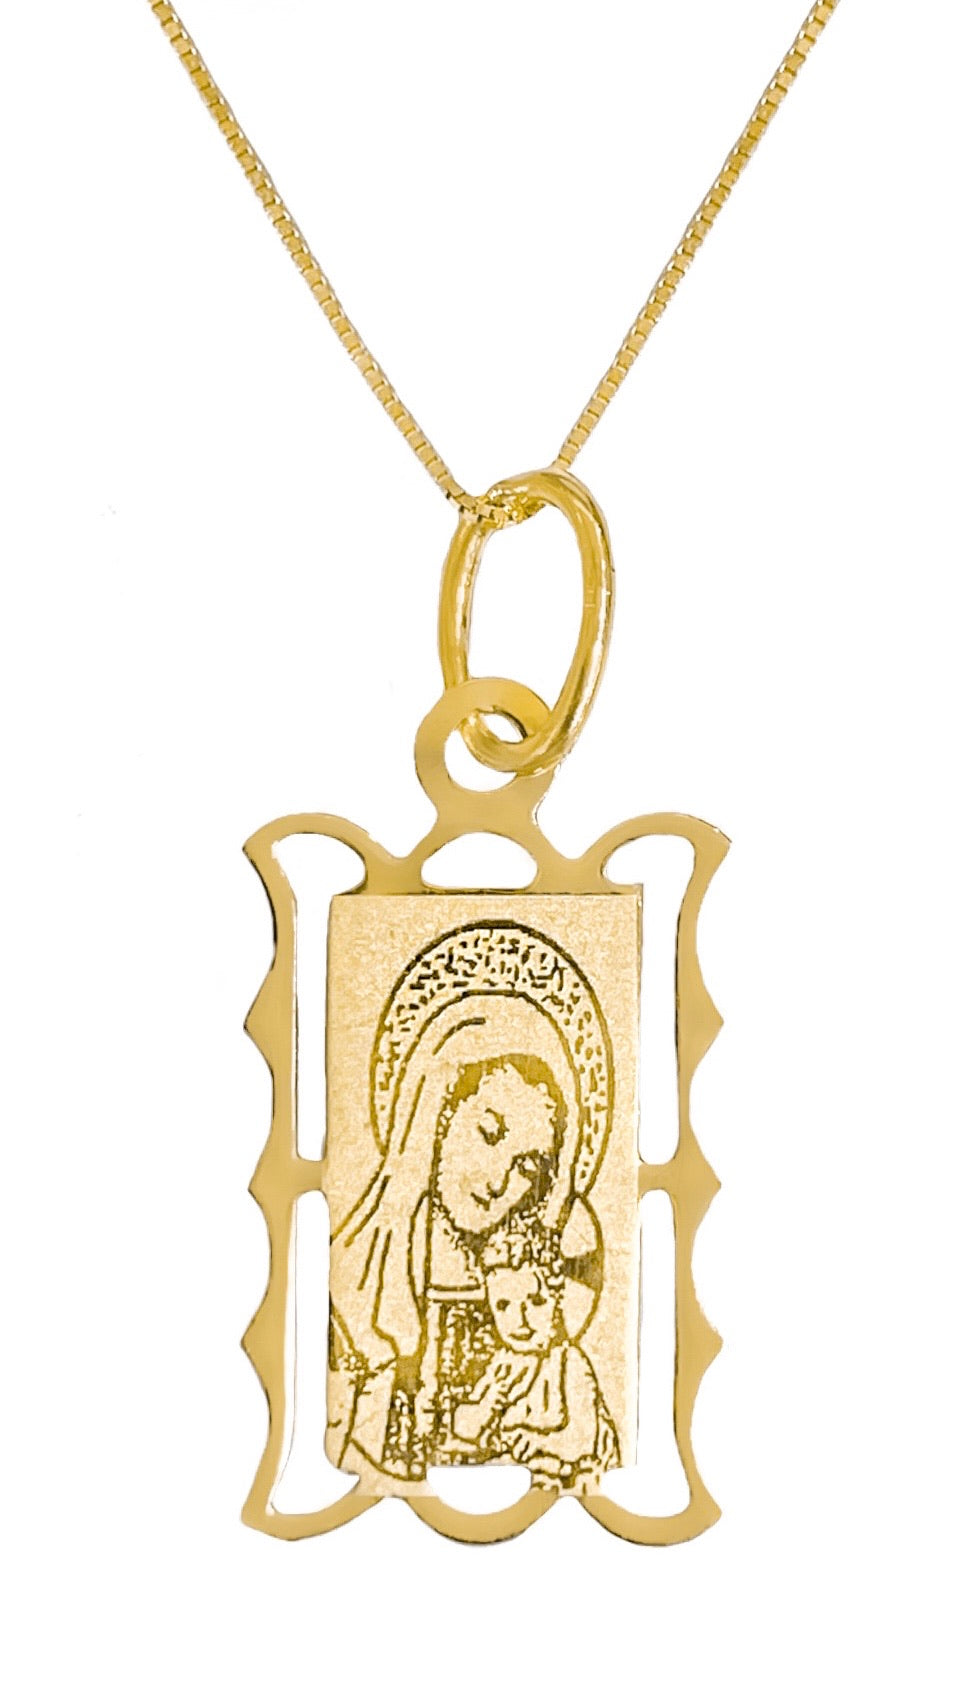 14K YELLOW GOLD WINDOW VIRGIN MARY NECKLACE